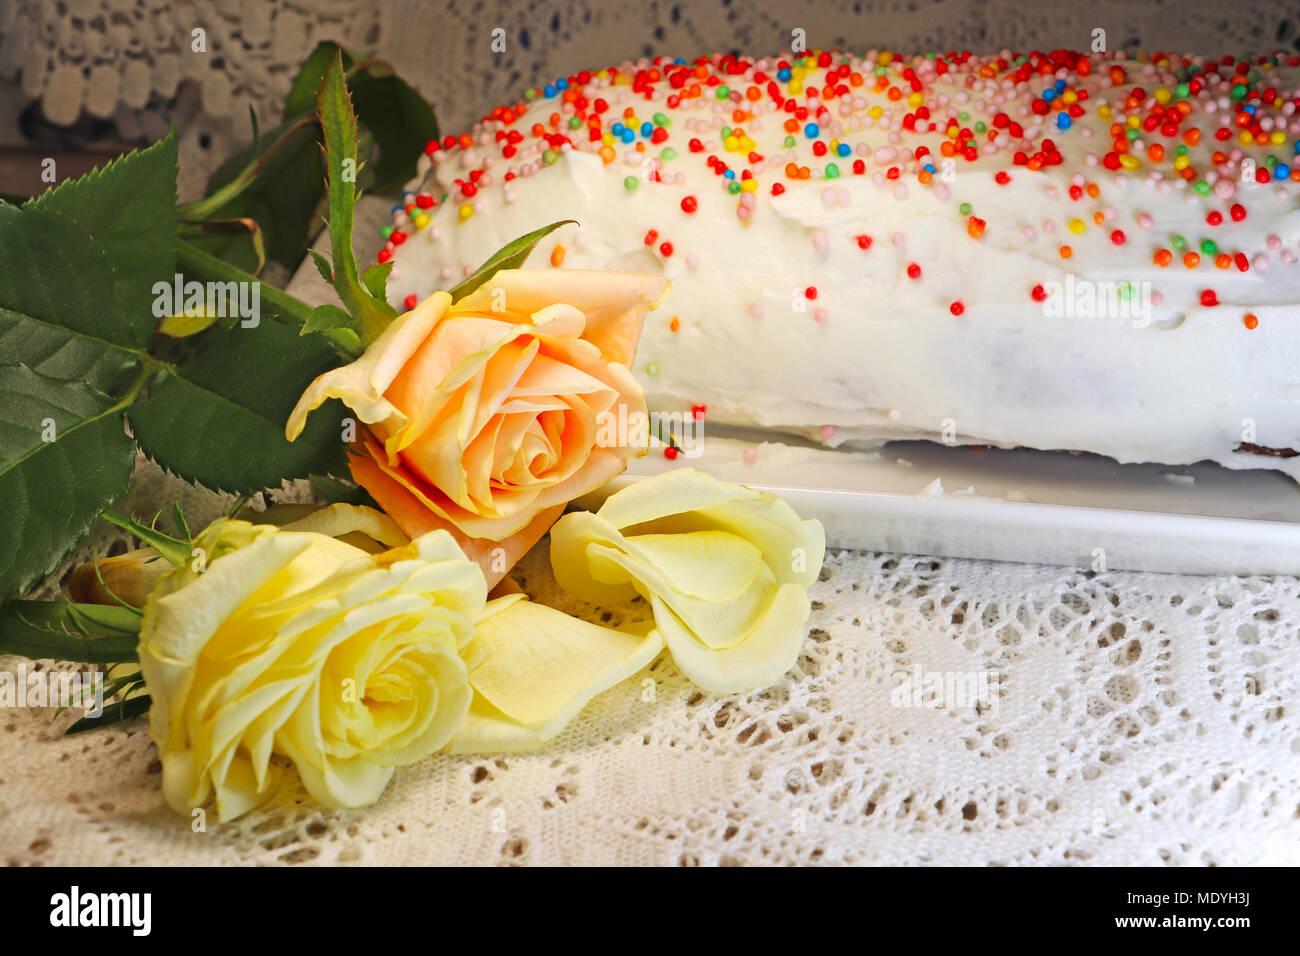 A white cake decorated with colored candies on a tray on a table with a lace tablecloth and roses Stock Photo